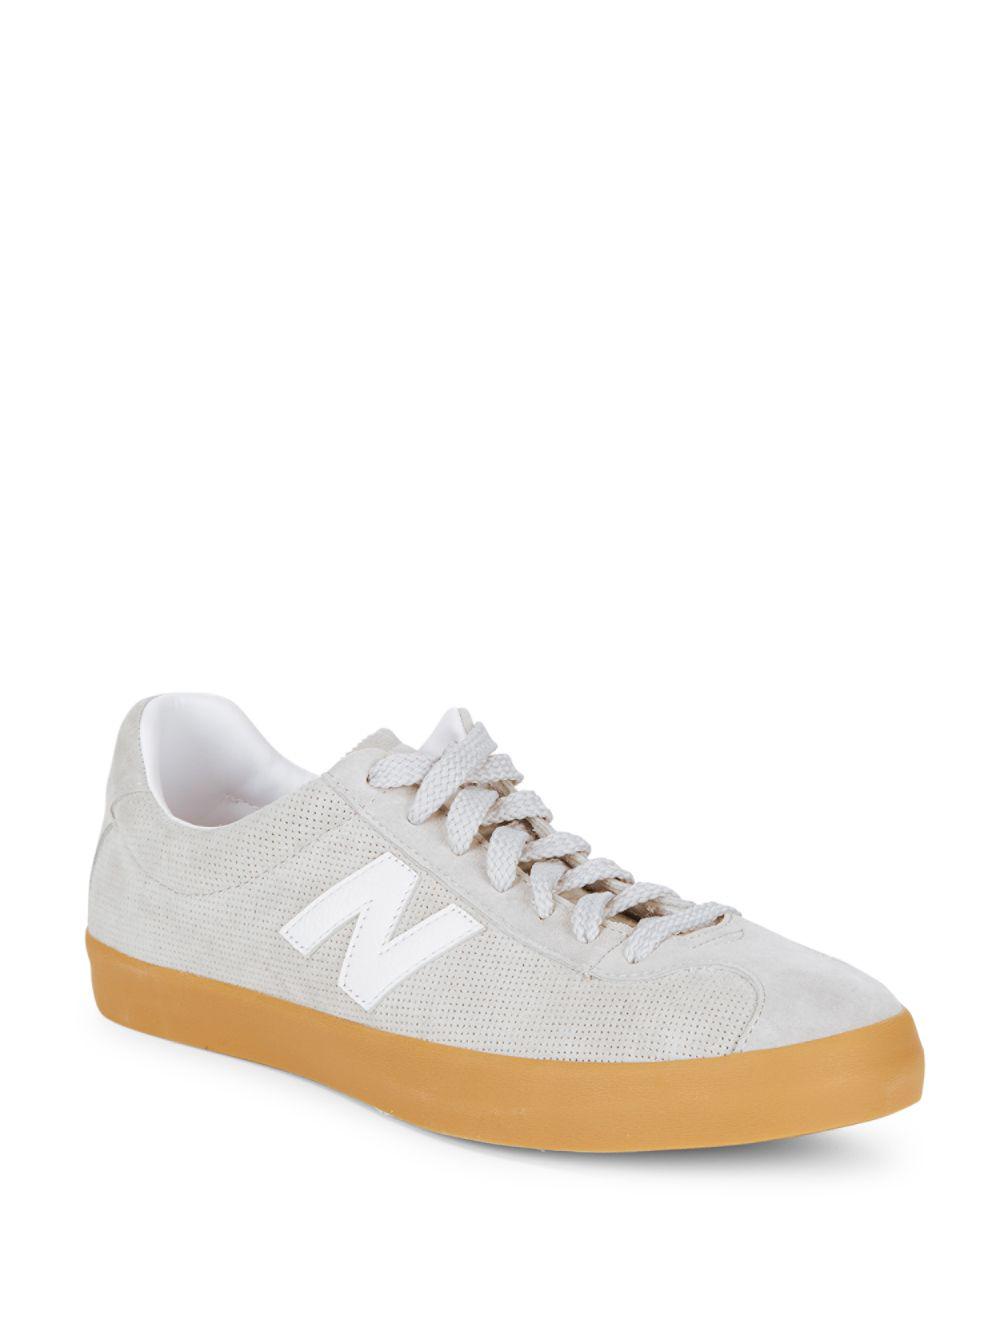 New Balance Tempus Suede Gum Sole Sneakers in Grey (Gray) - Lyst